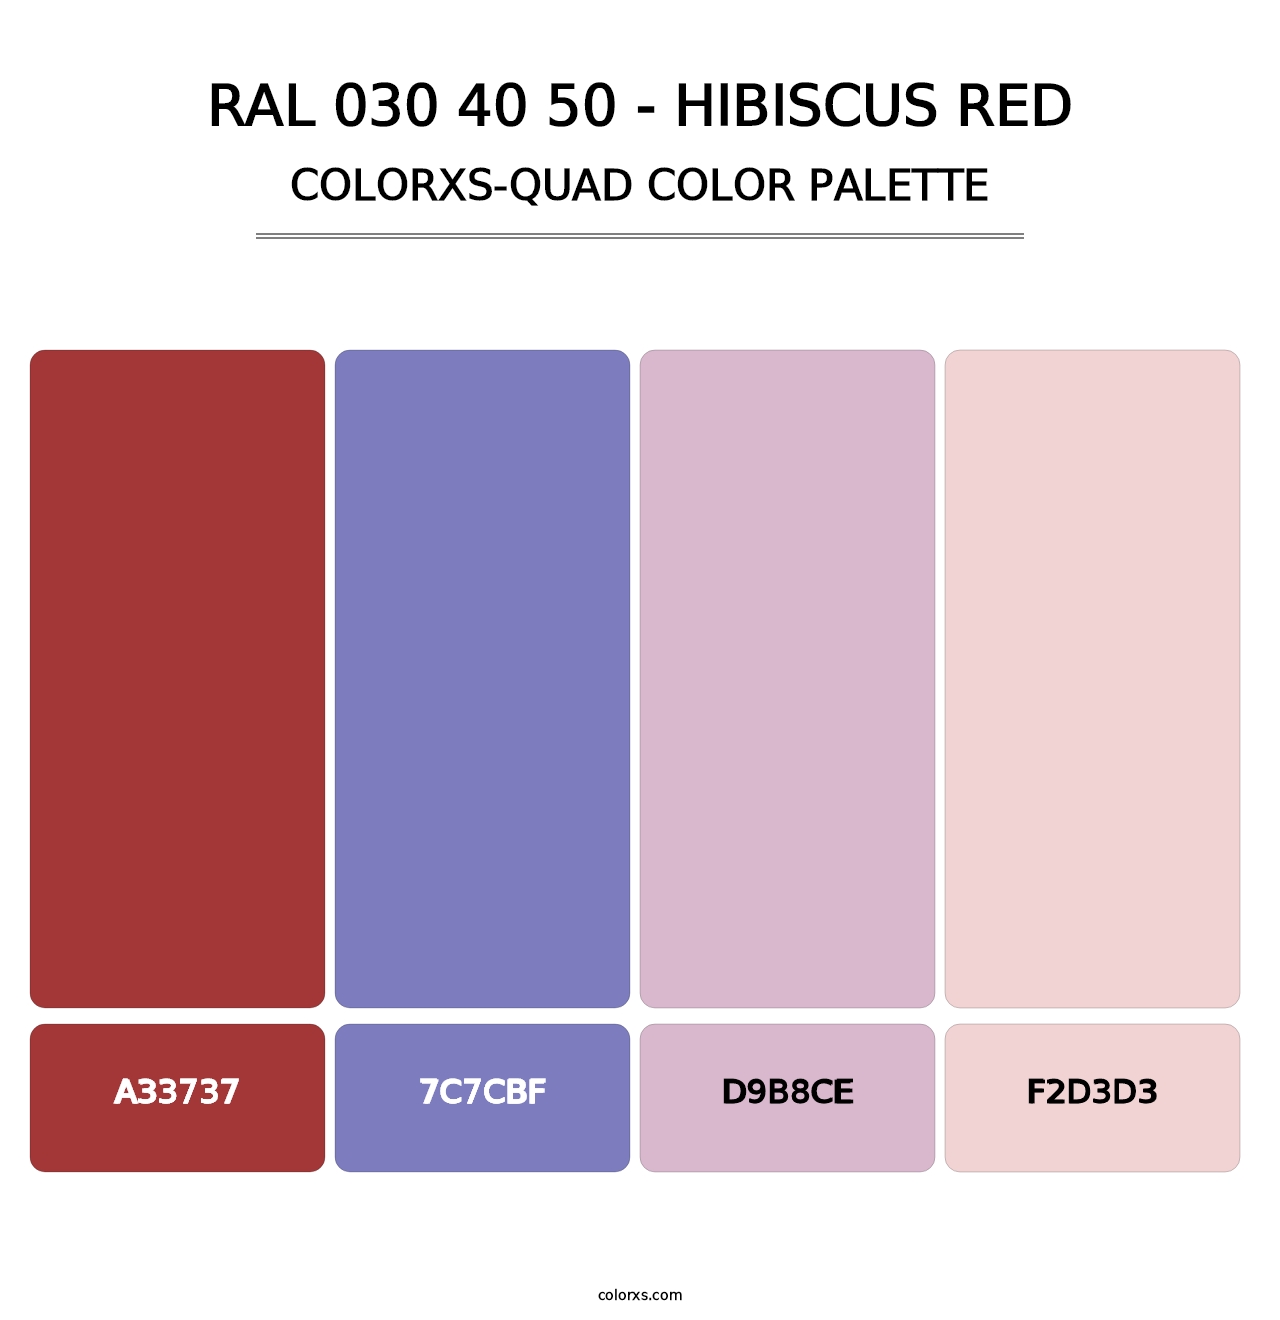 RAL 030 40 50 - Hibiscus Red - Colorxs Quad Palette